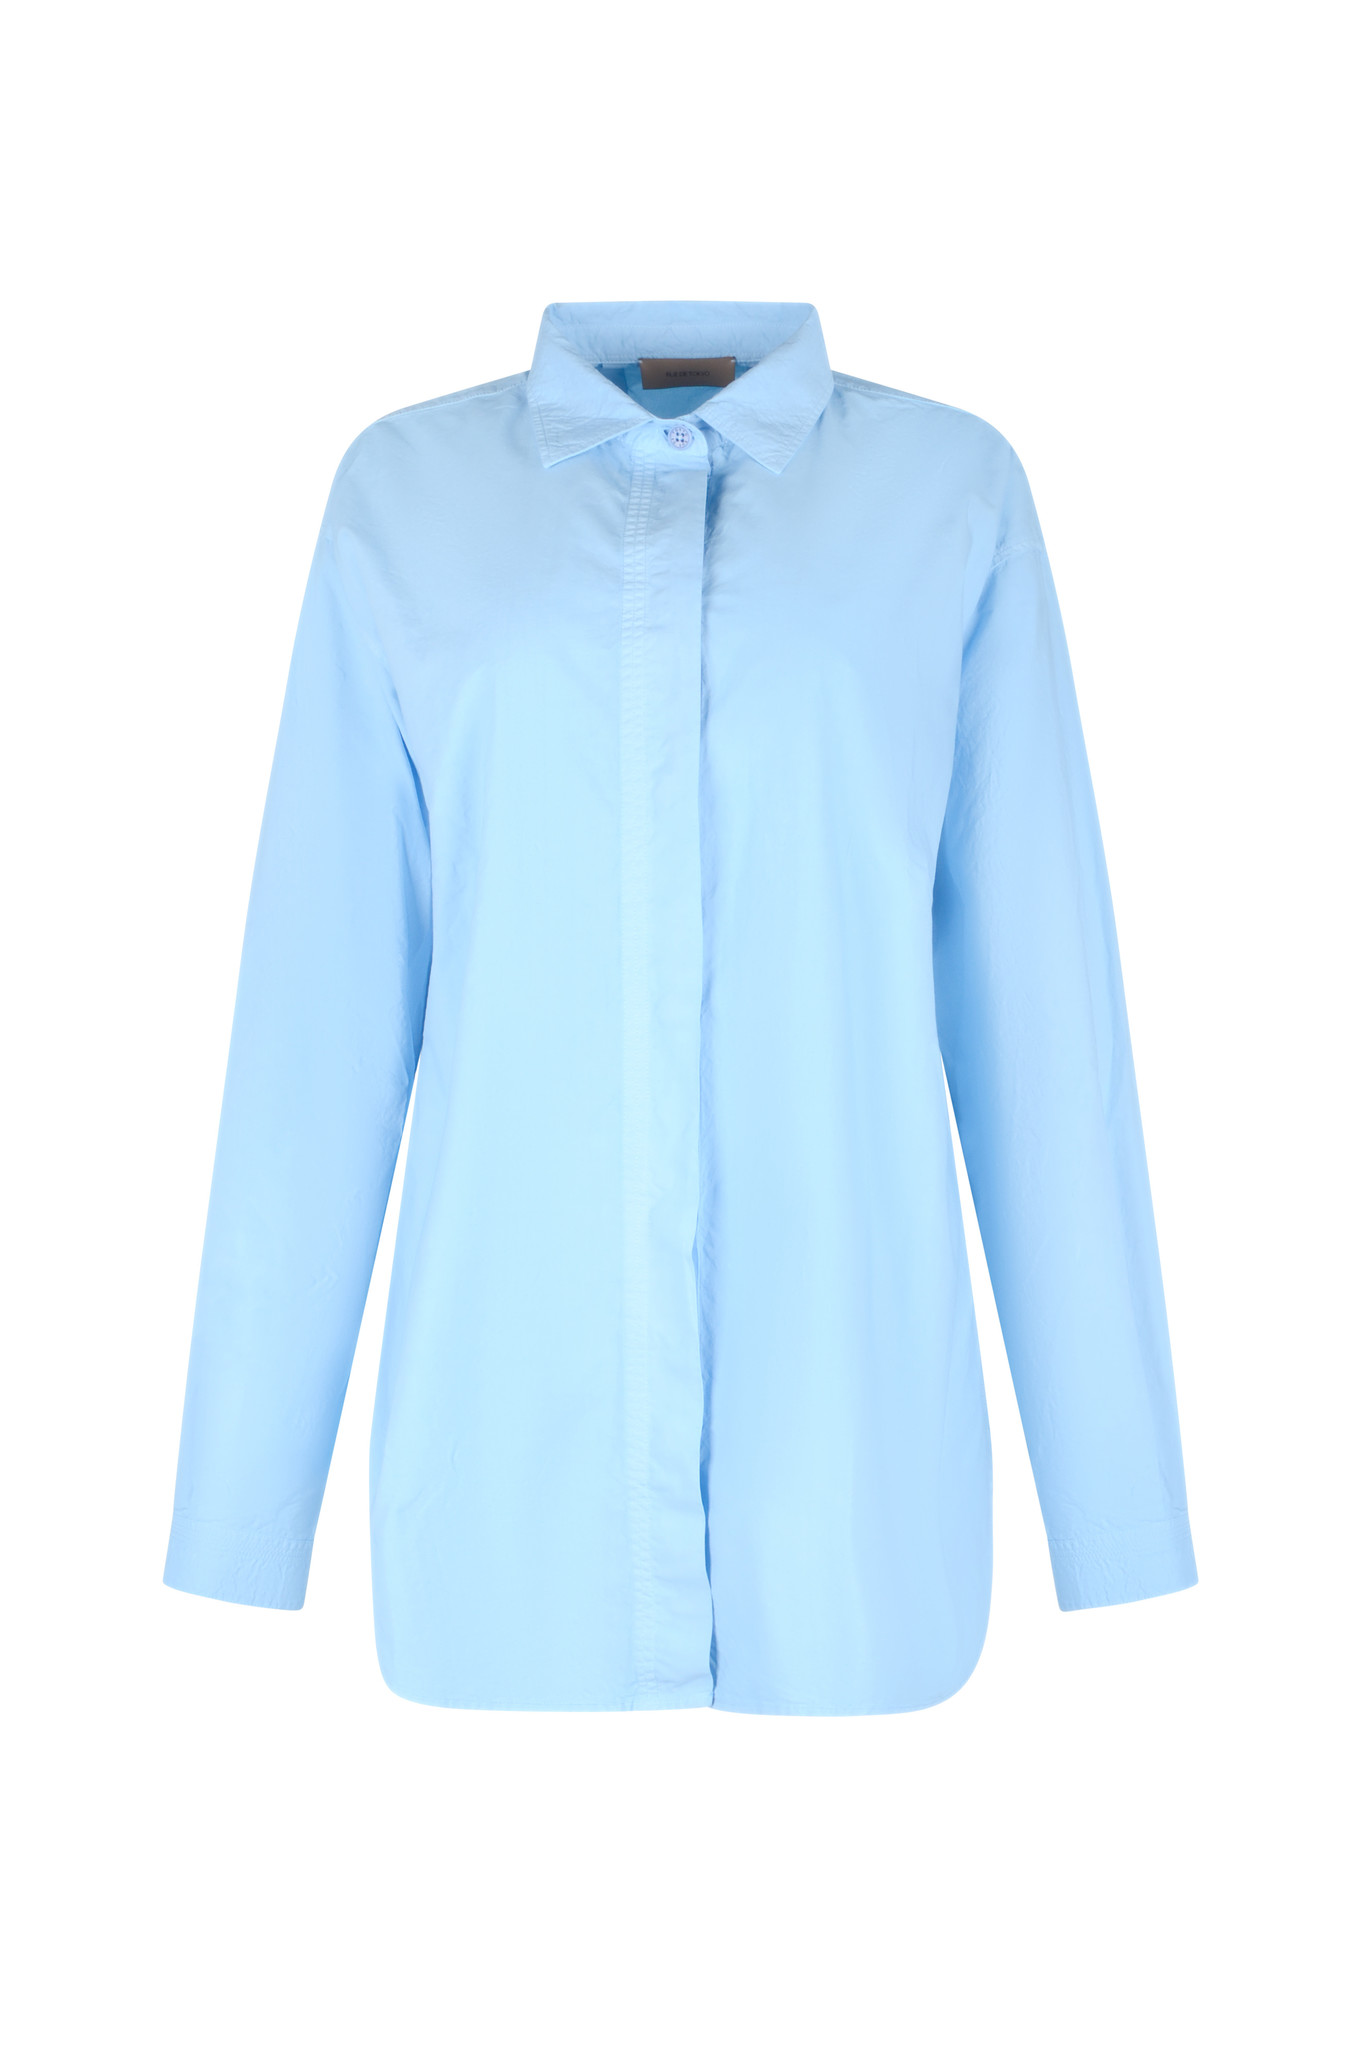 Shelby Shirt in Bright Light Blue-1